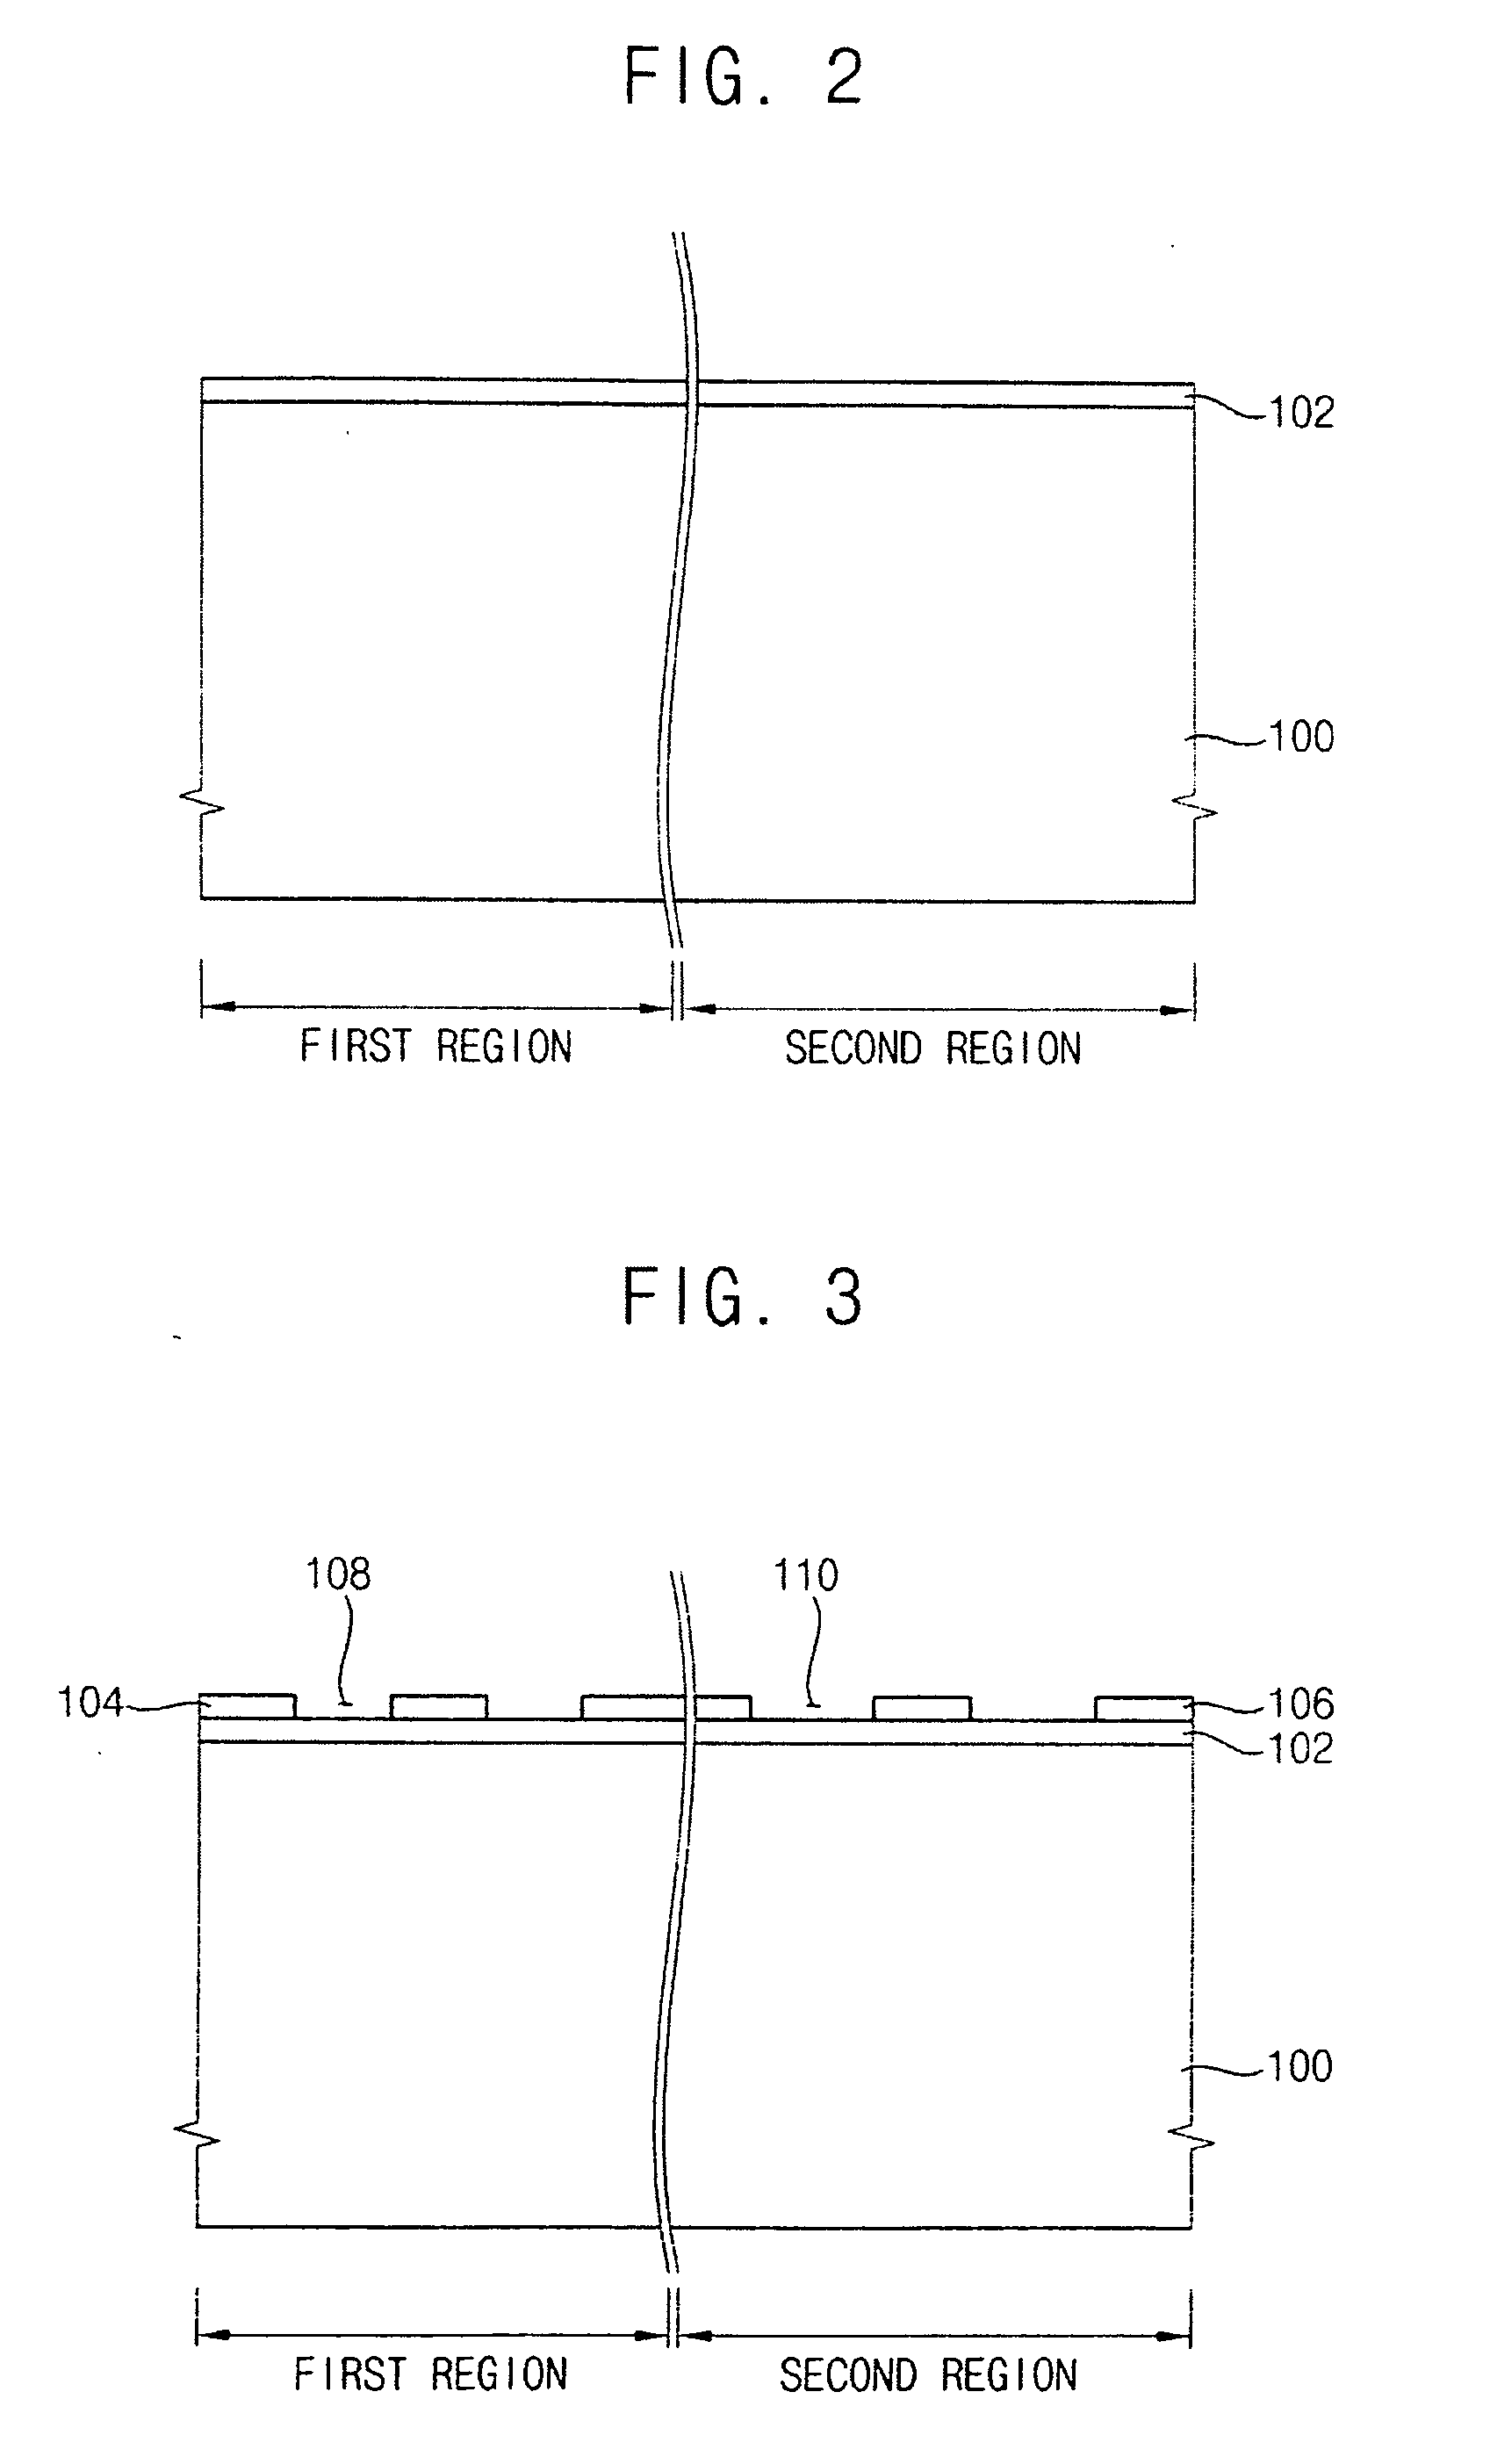 Methods of forming a silicon oxide layer and methods of forming an isolation layer